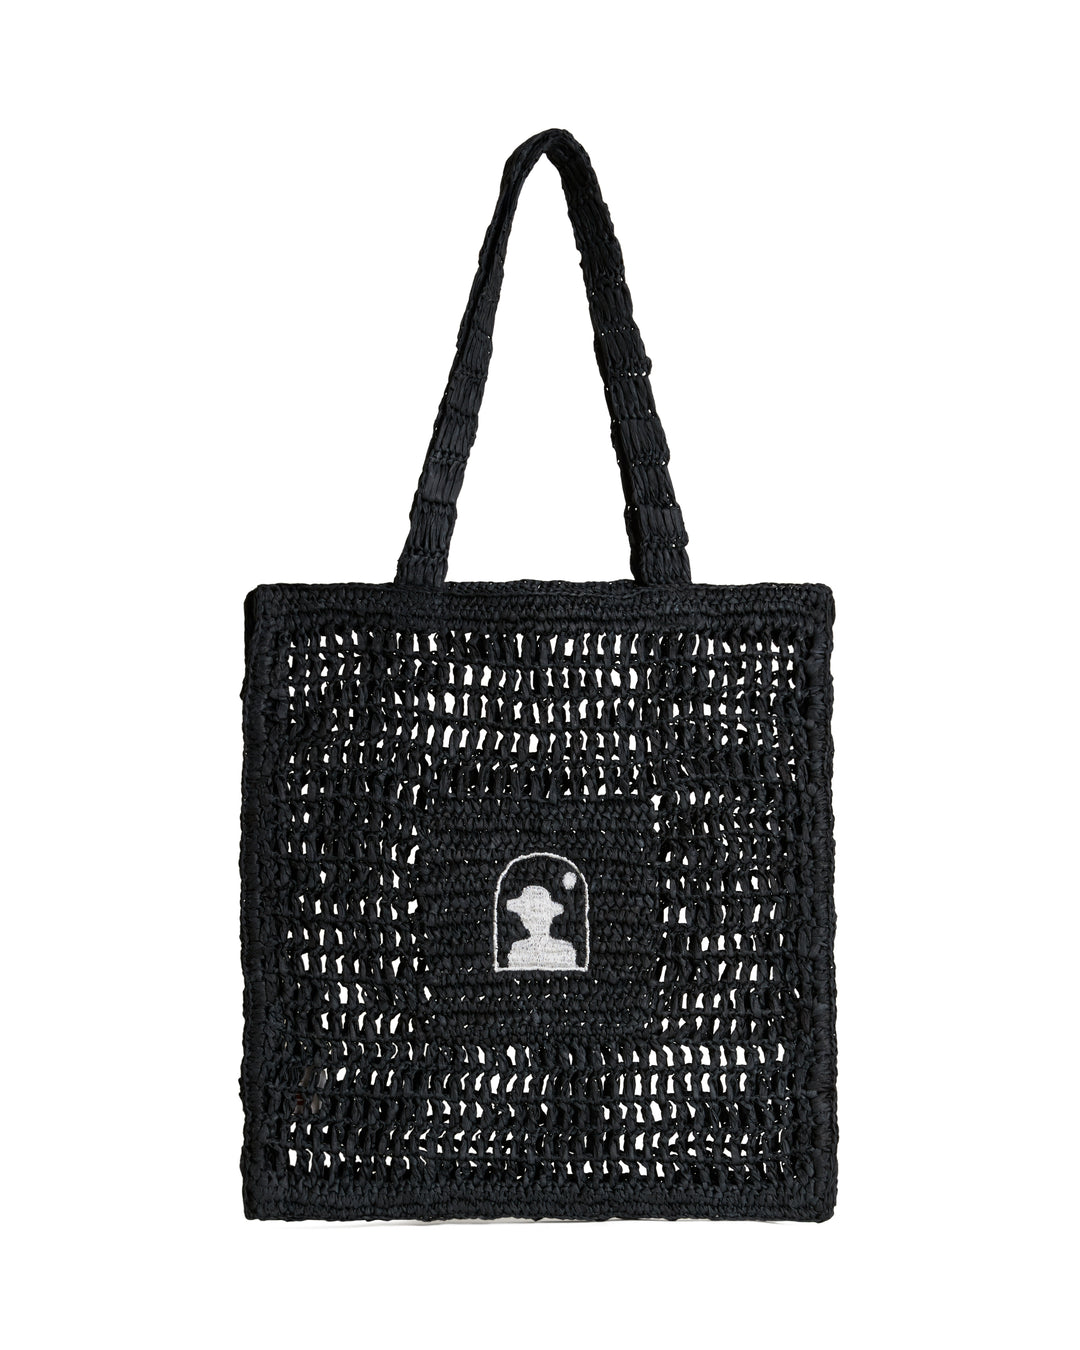 The Dandy Del Mar Amabile Rafia Bag - Onyx, with a square shape, featuring a central white logo patch, isolated on a white background.